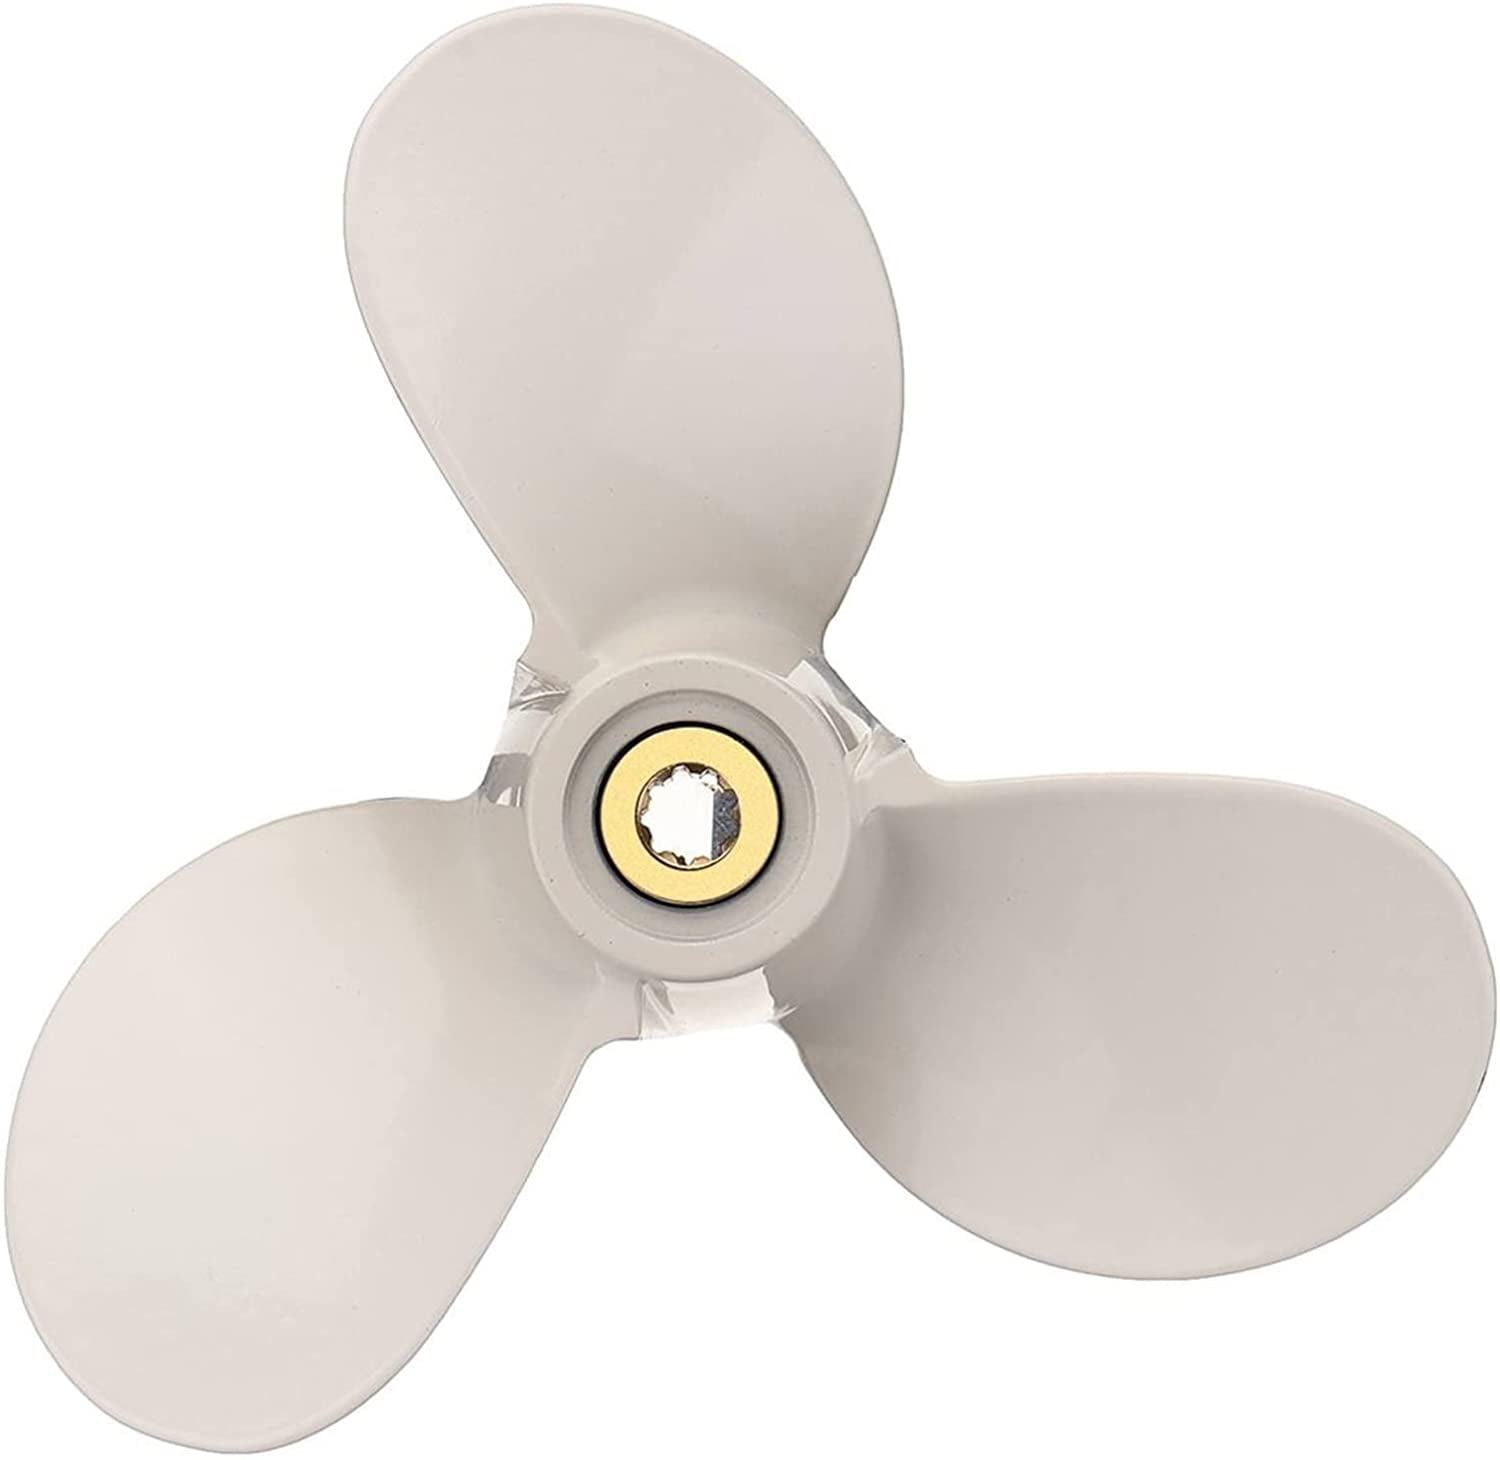 ALUMINUM PROPELLER WHITE FOR YAMAHA OUTBOARD ENGINE PART 7 1/2 X 7-BA 